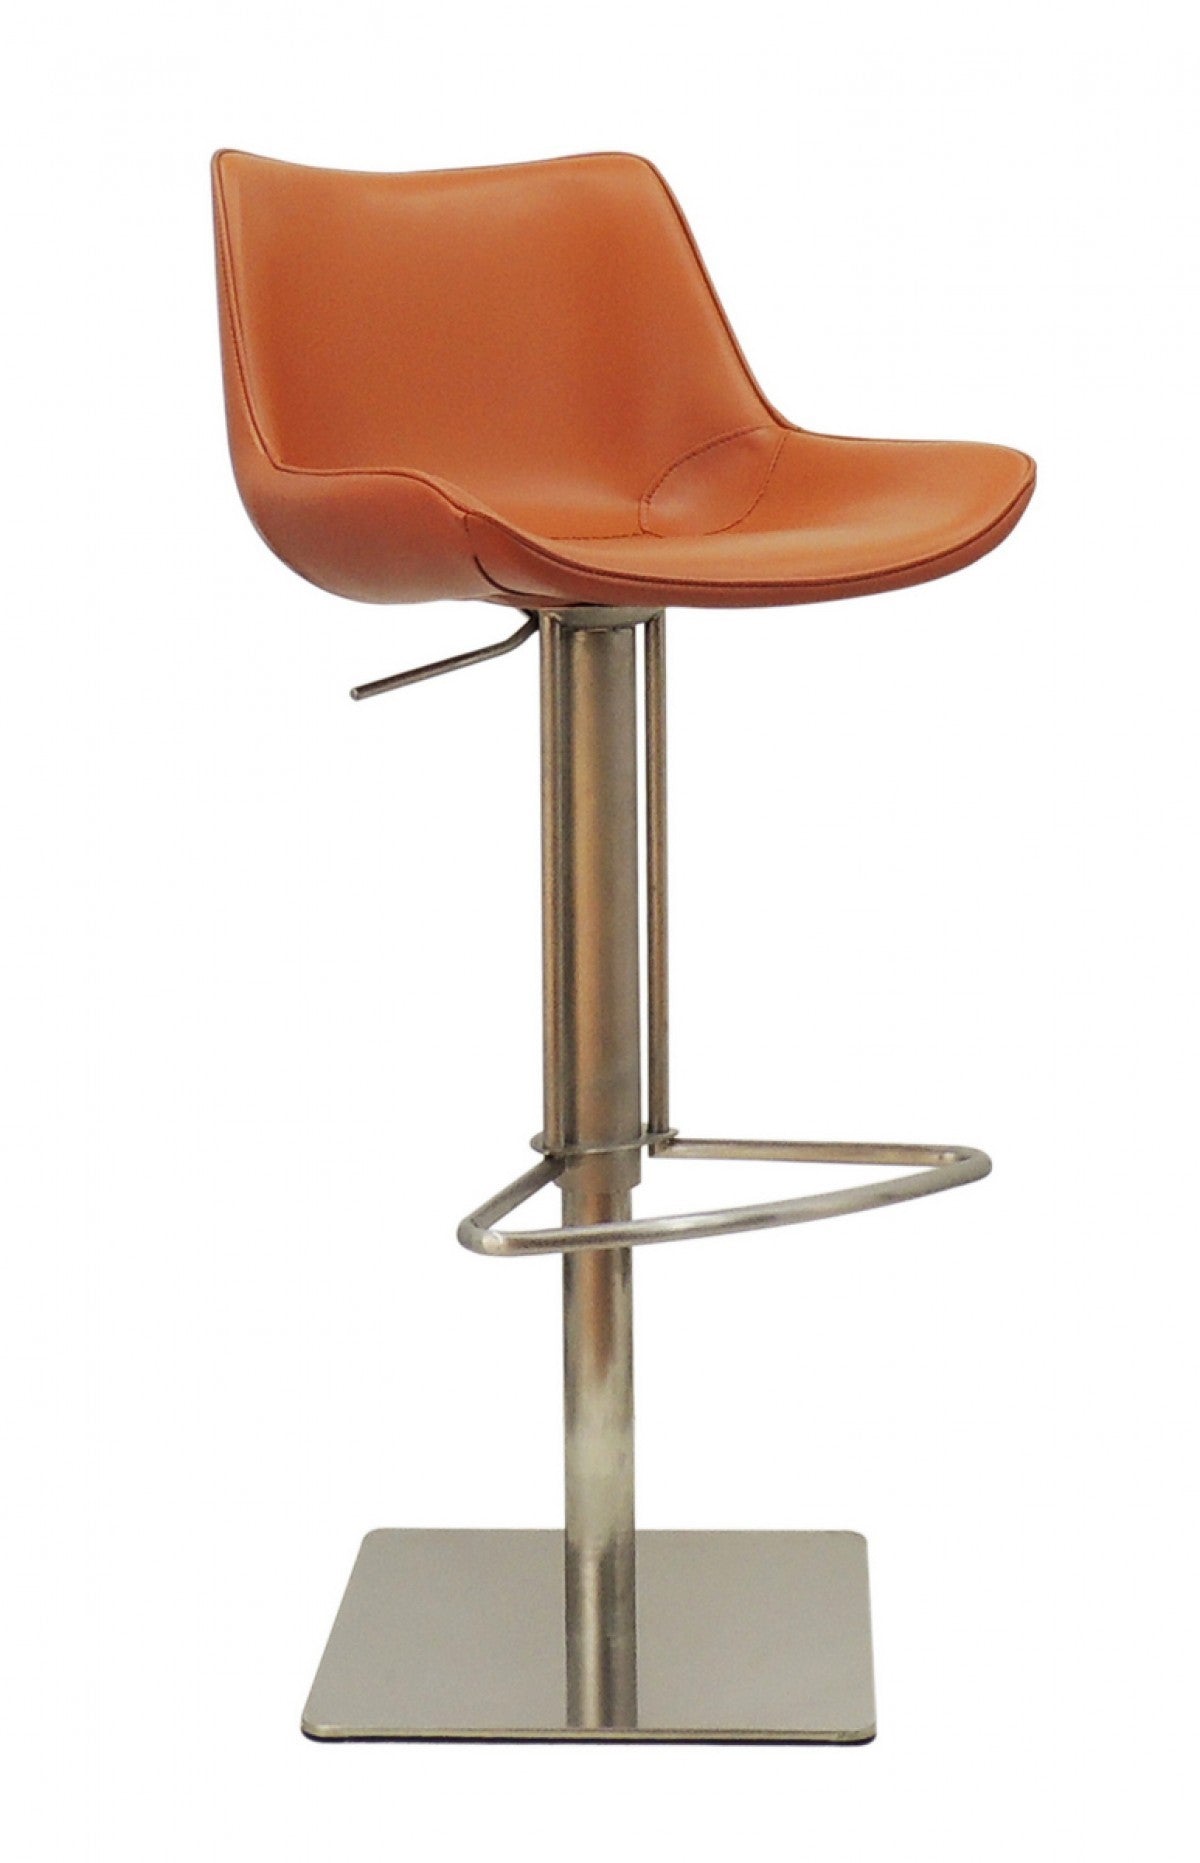 31" Terra Cotta And Silver Faux Leather And Stainless Steel Swivel Bar Height Bar Chair